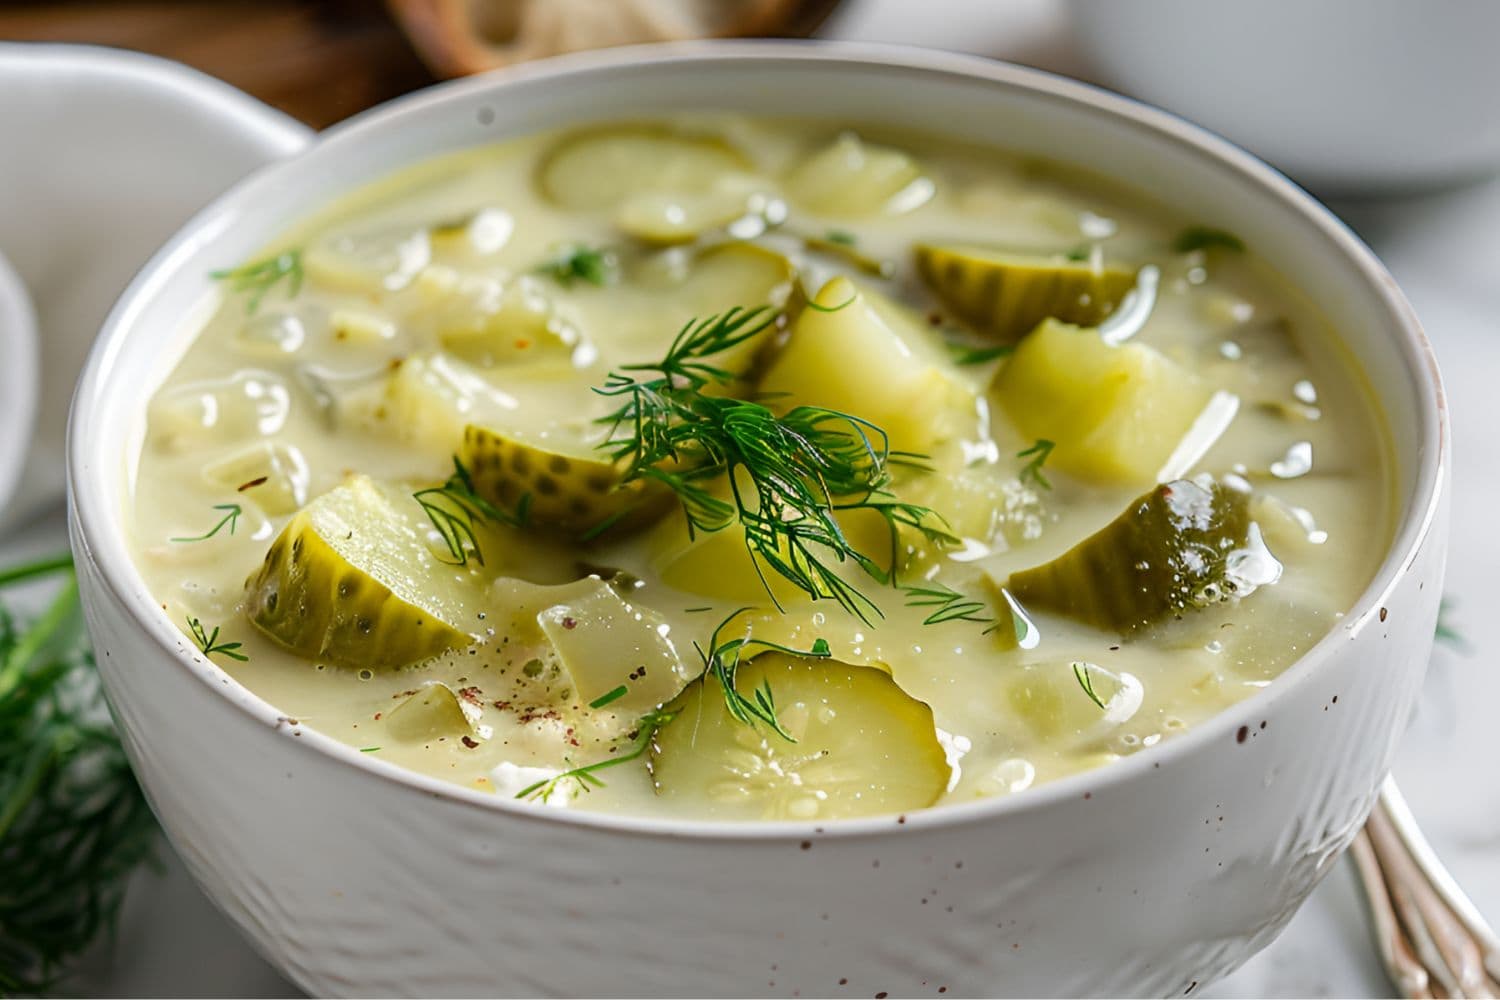 Super Close up of Polish Dill Pickle Soup with Lots of Pickles, Onions, and Fresh Dill